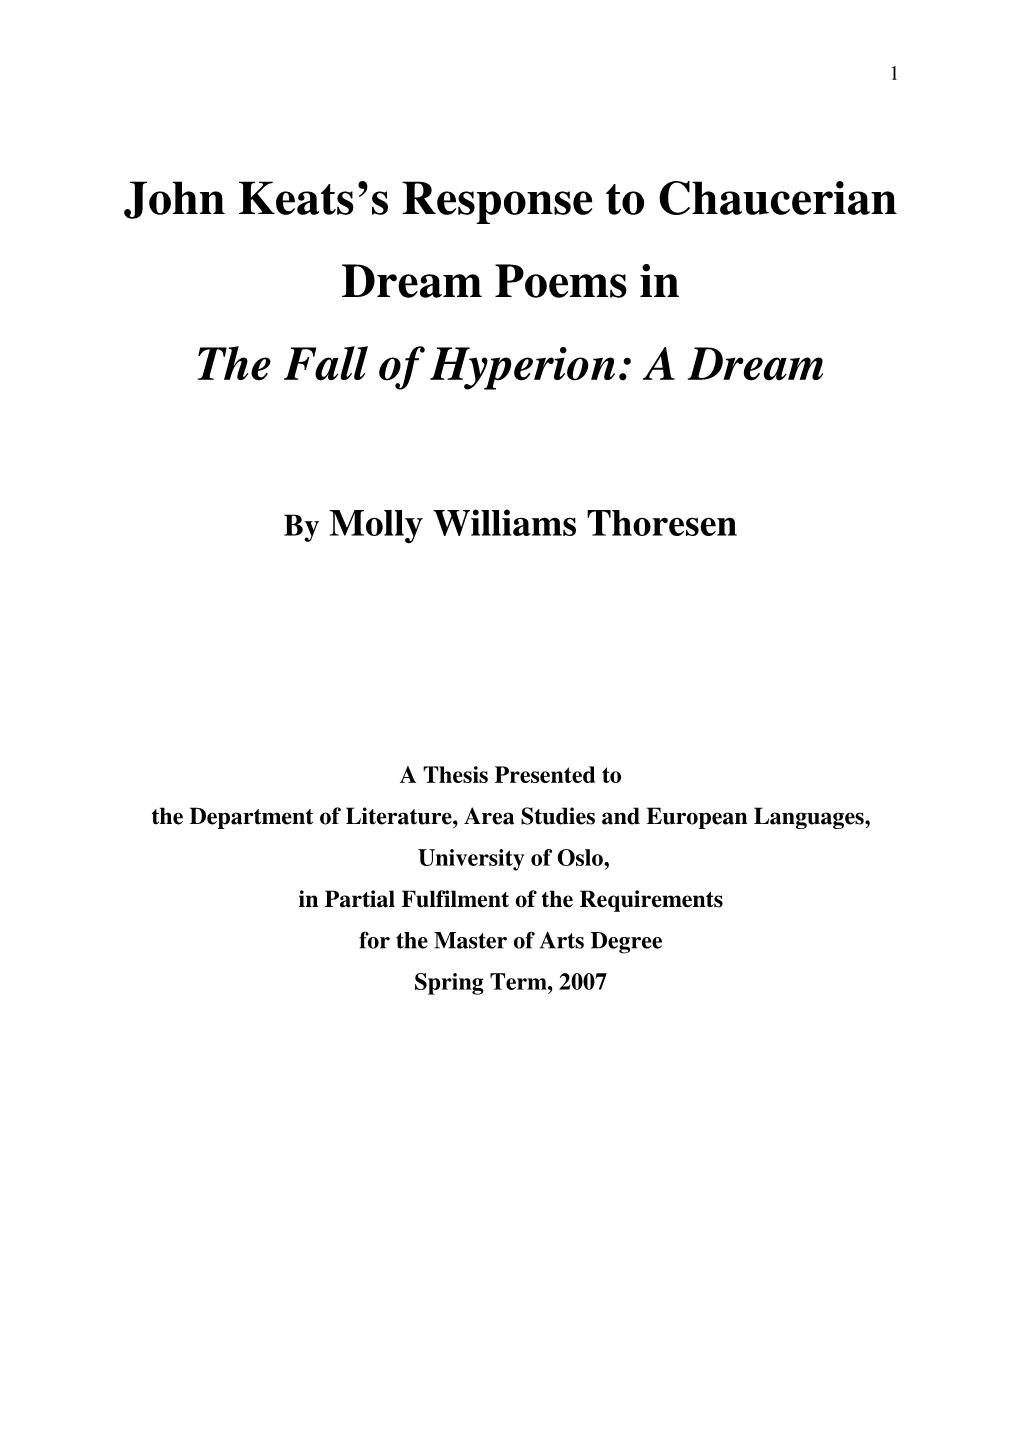 John Keats's Response to Chaucerian Dream Poems in the Fall Of